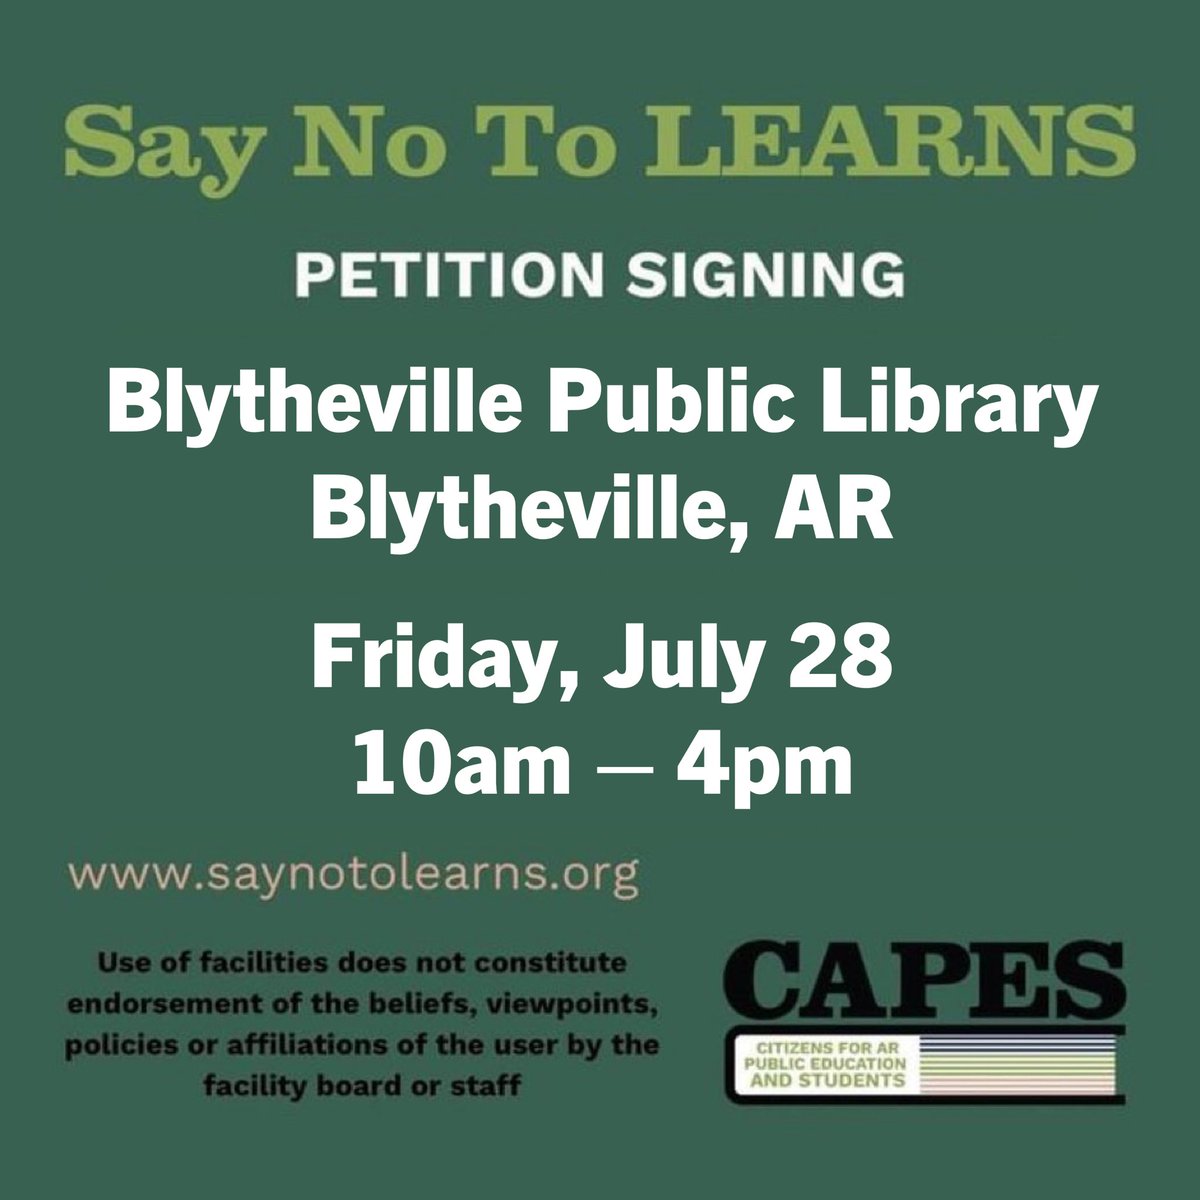 Mississippi County, it’s not too late to make your voice heard. Come see us Friday and sign the petition!
#SayNoToLEARNS